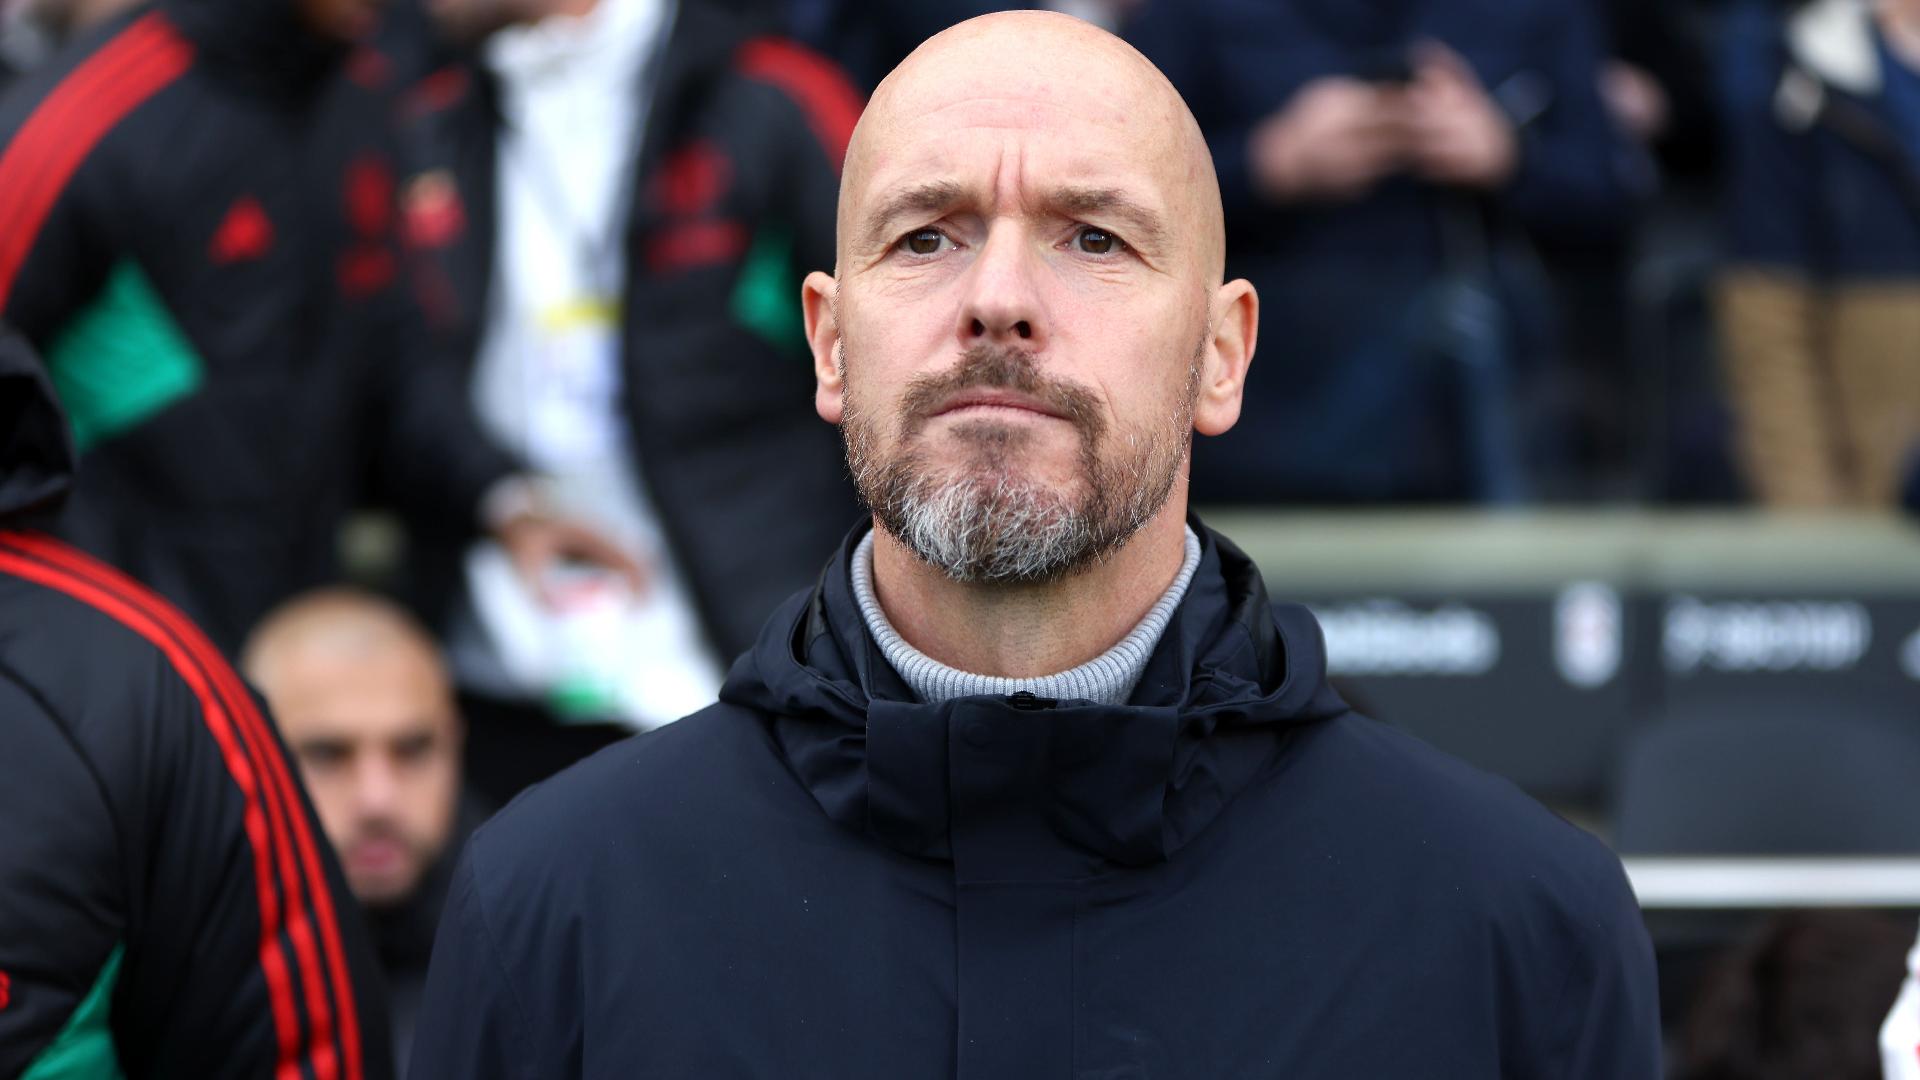 Erik ten Hag says Everton will be 'mad' and urges Man Utd to match them | beIN SPORTS